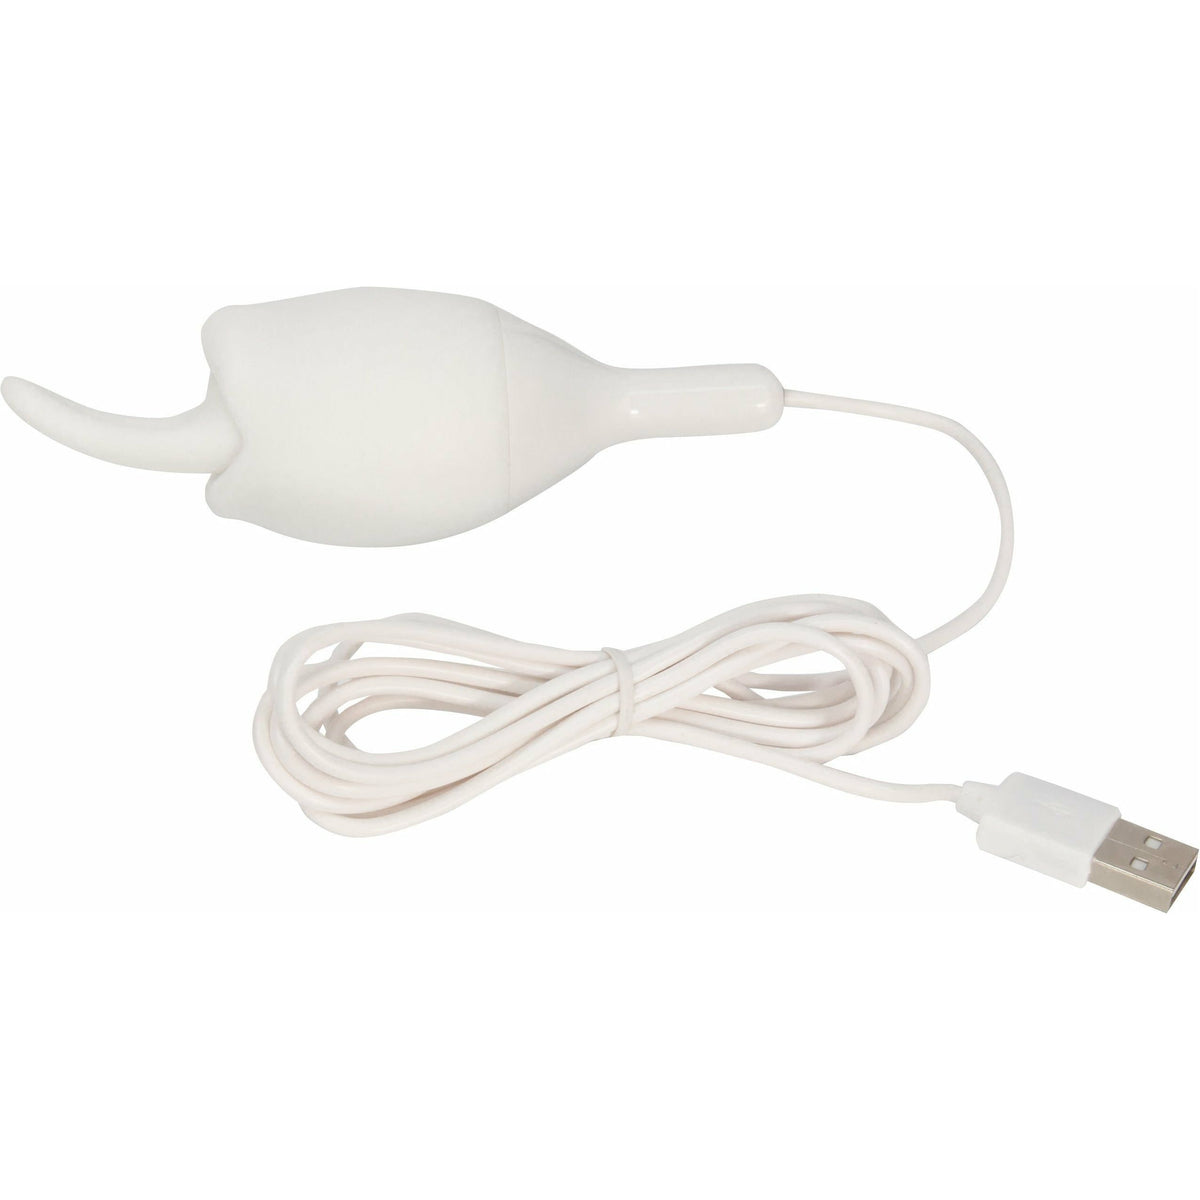 NMC Hold Tight - Tongue Vibrator - Rechargeable - White